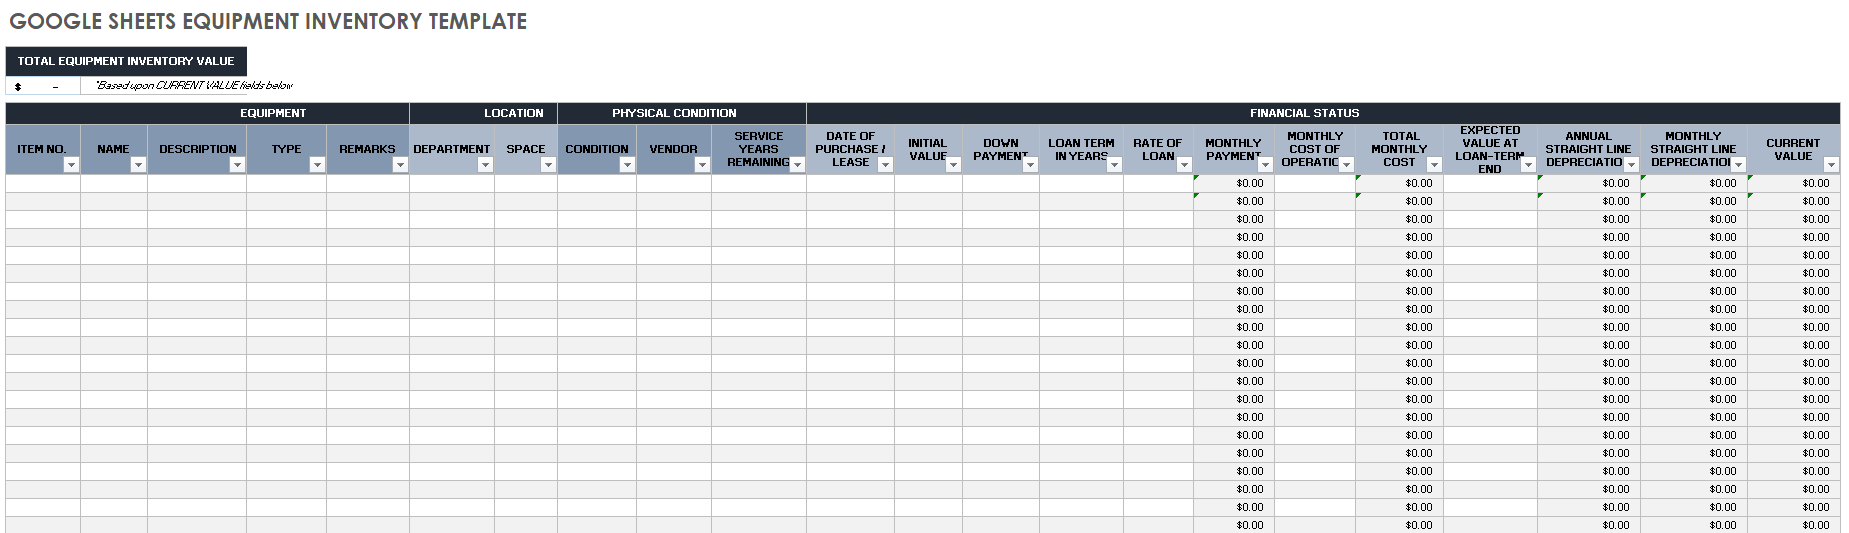 Google Sheets Equipment Inventory Template